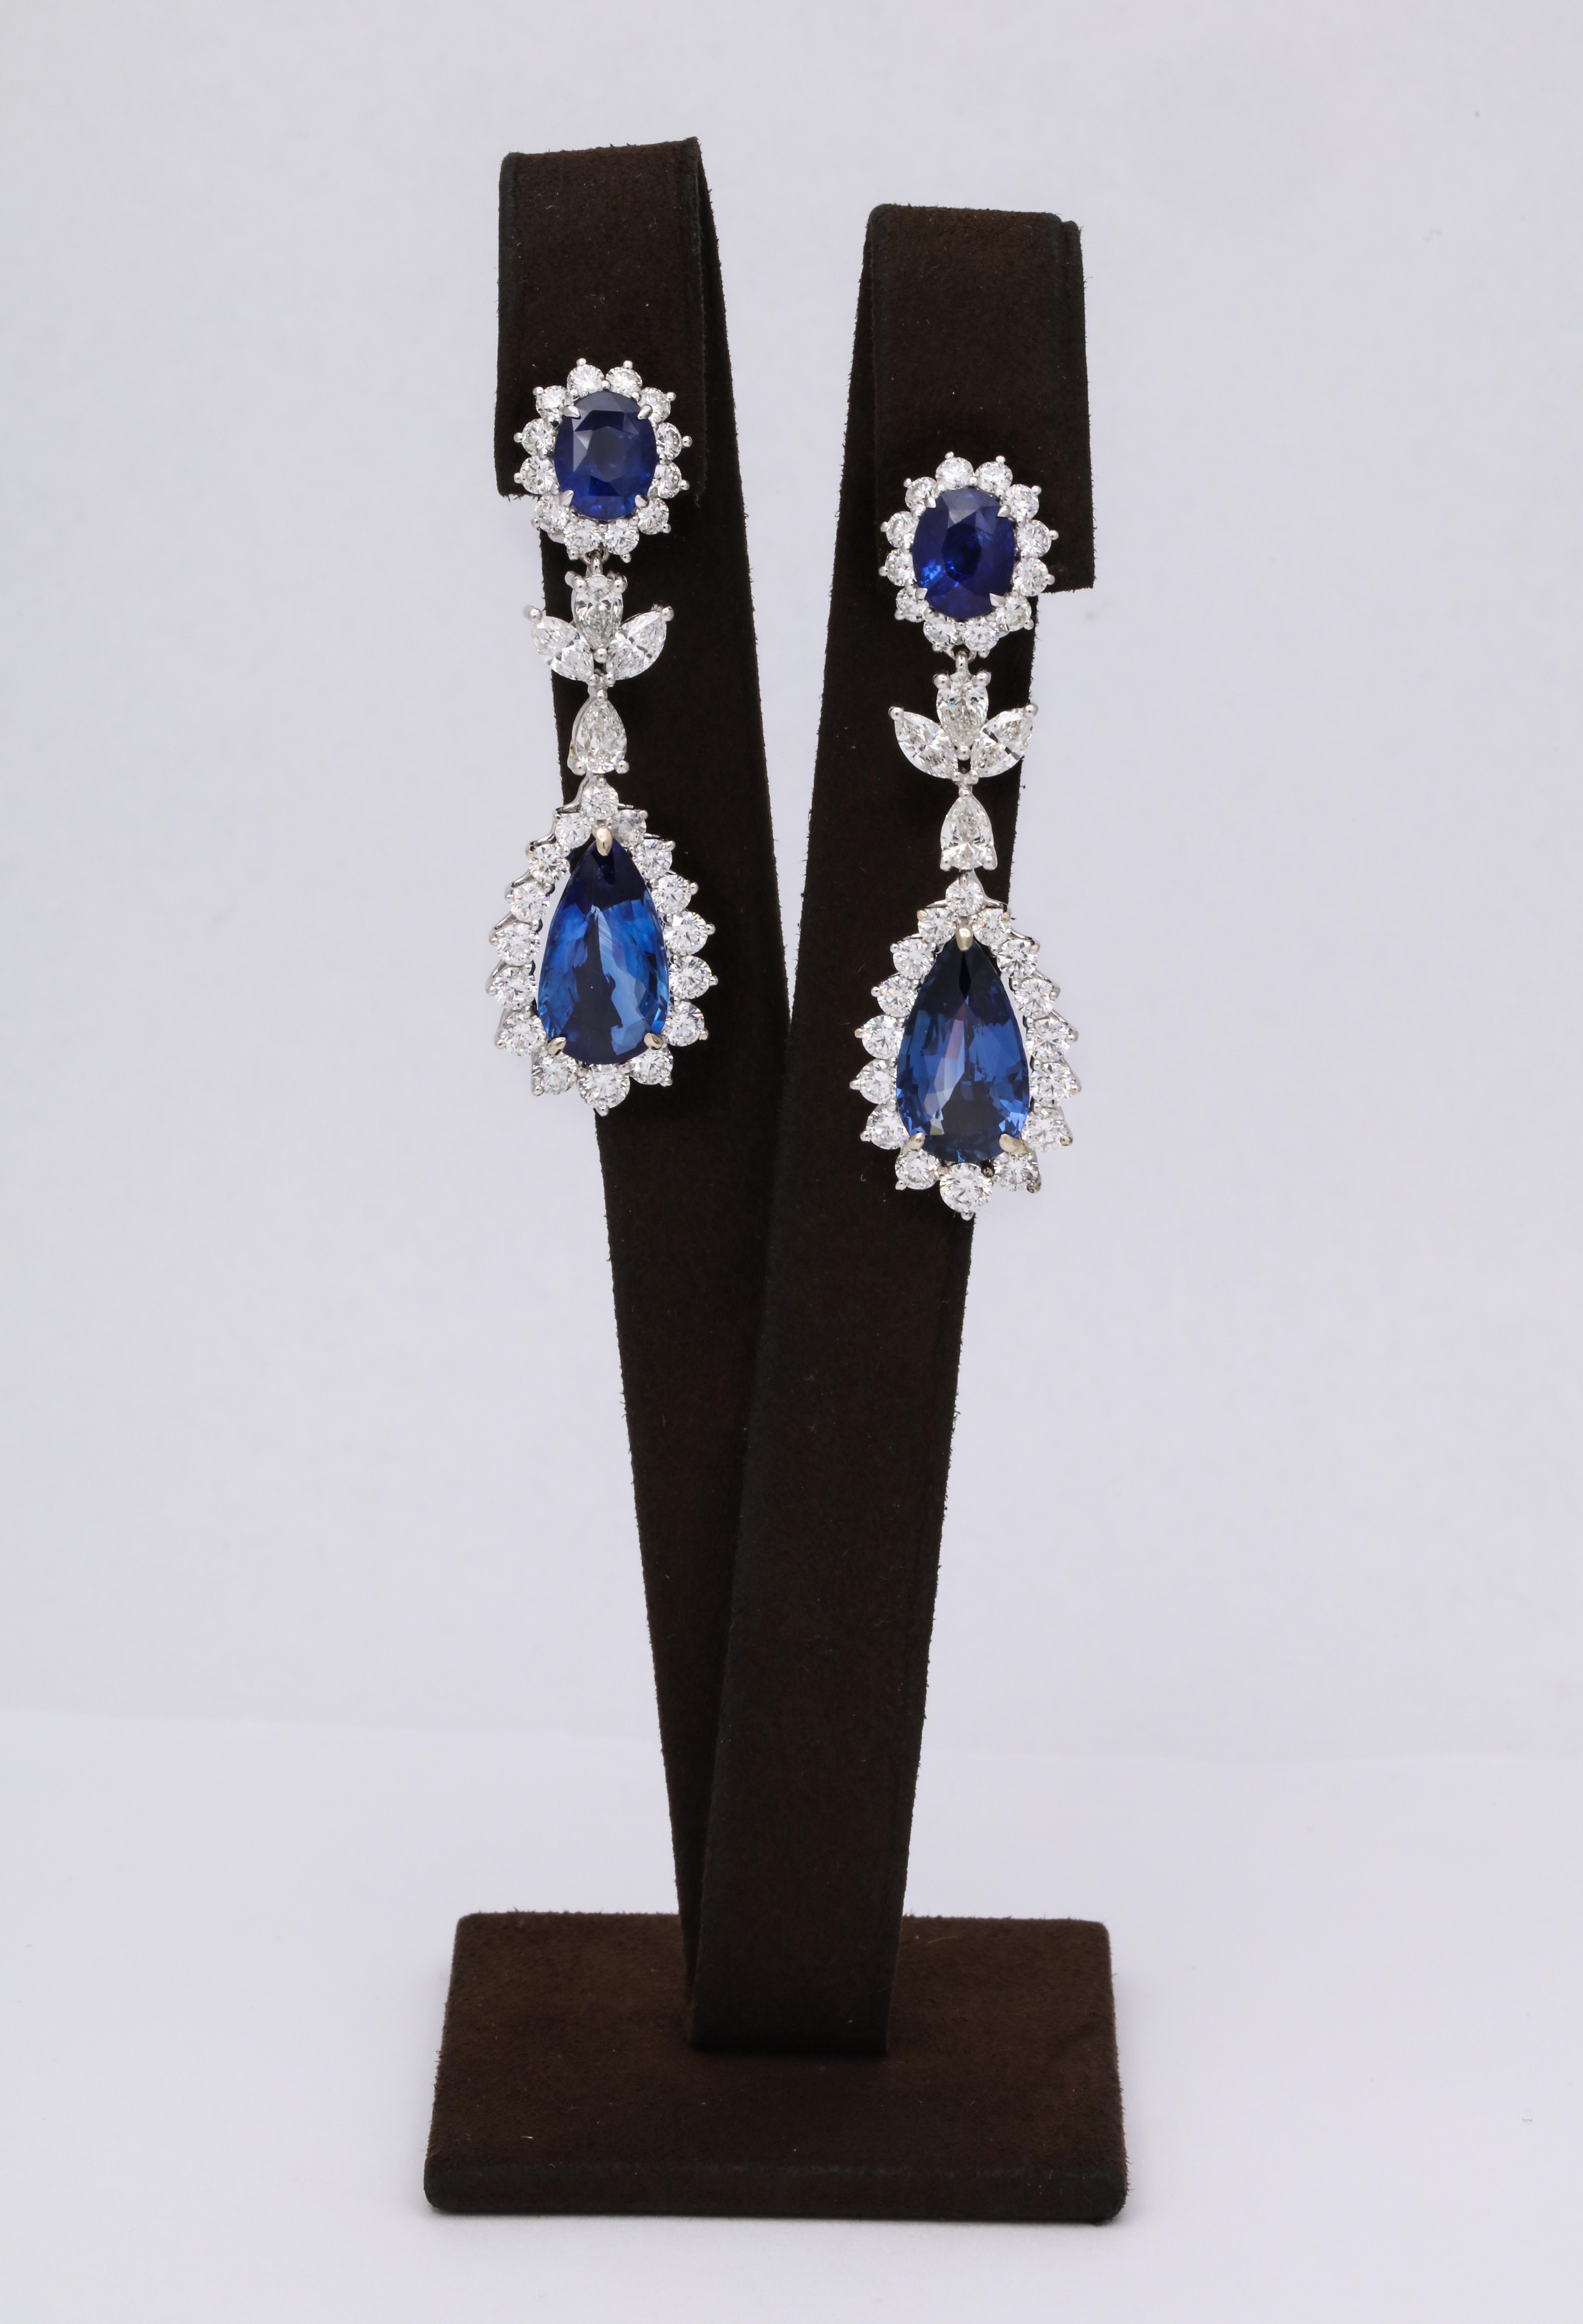 
Blue Sapphire Drop Earrings 

21.40 carats of vibrant Ceylon Blue Sapphires surrounded by 7.27 carats of white pear, marquise and round brilliant cut diamonds. 

The pear shape drops weigh 15.03 carats and are GRS certified.

The earrings measure